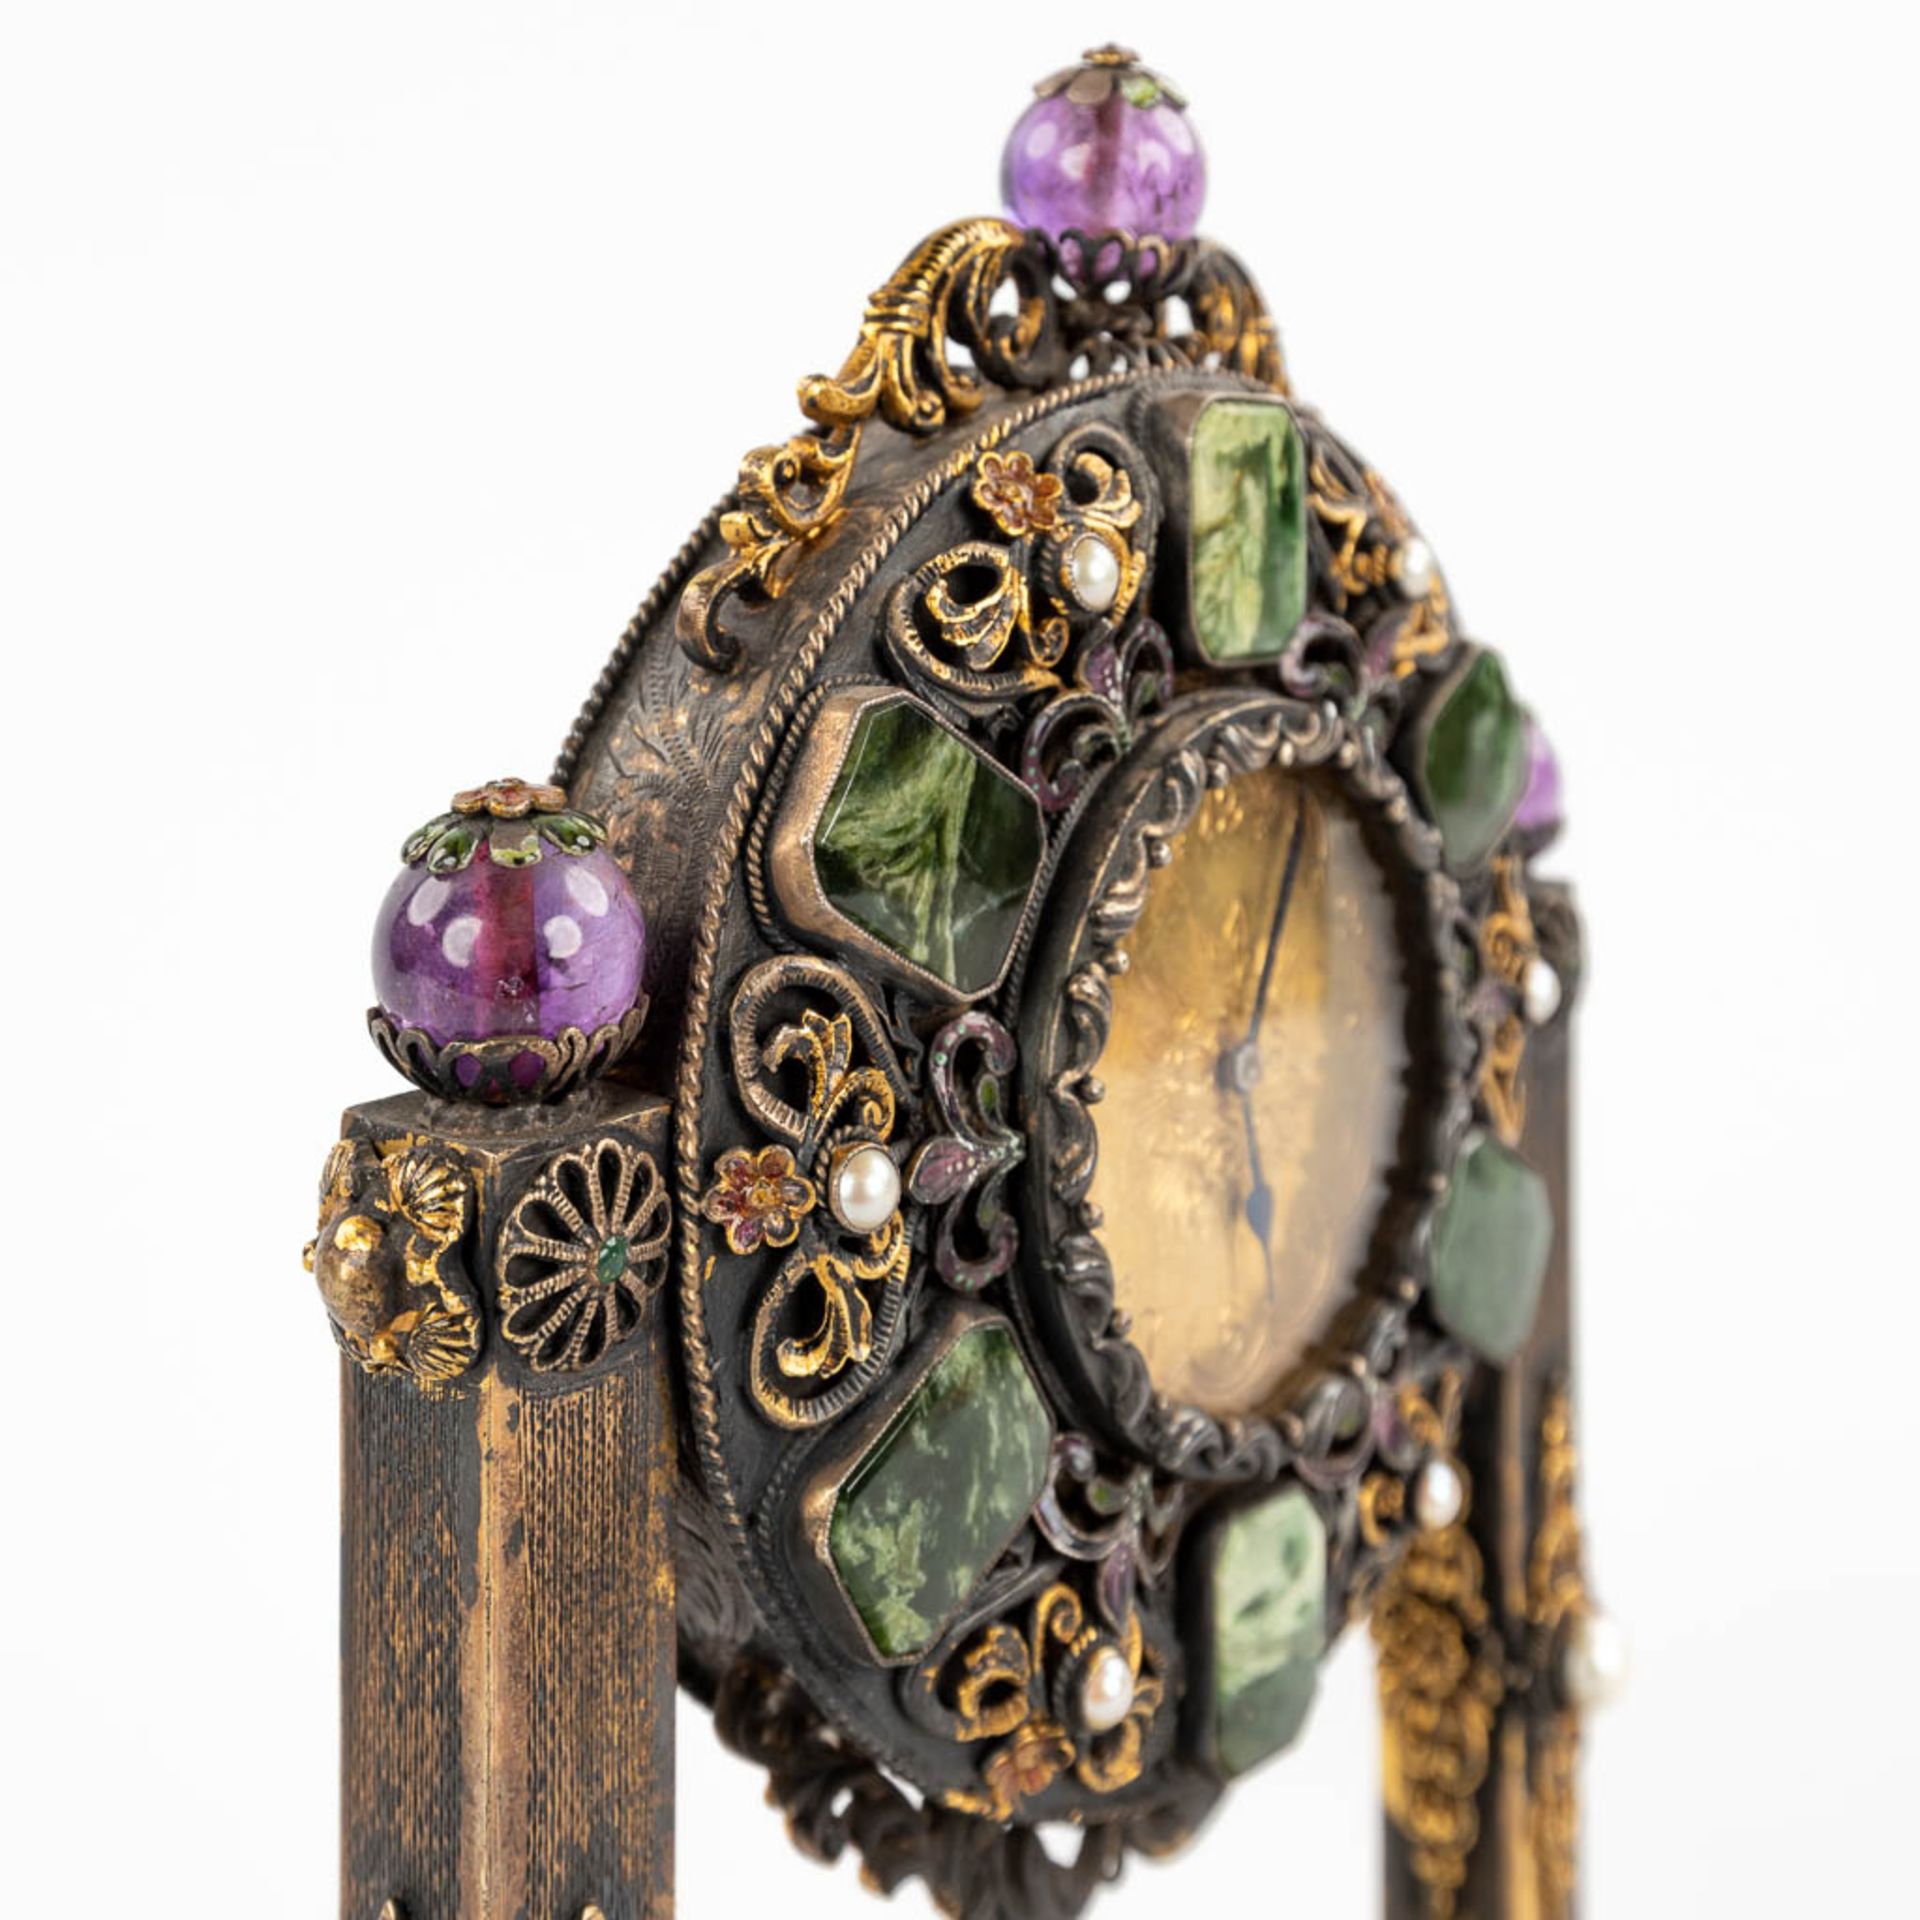 A mantle clock, silver and gold-plated metal and decorated with stone and onyx, pearls. Circa 1900. - Image 9 of 14